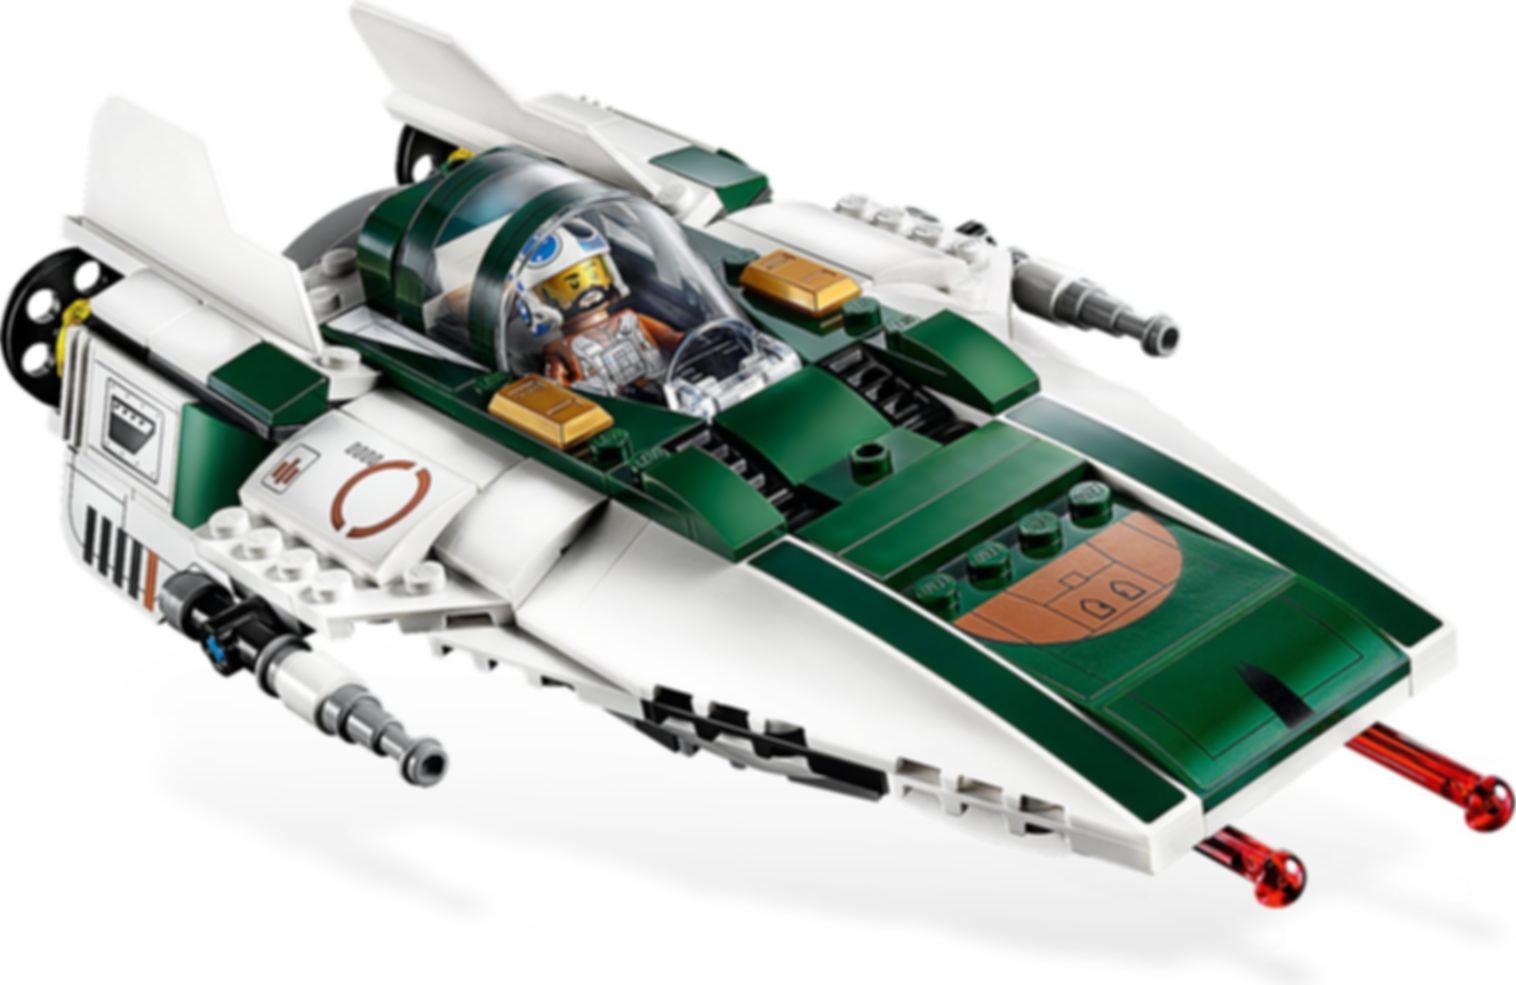 LEGO® Star Wars Resistance A-Wing Starfighter™ gameplay